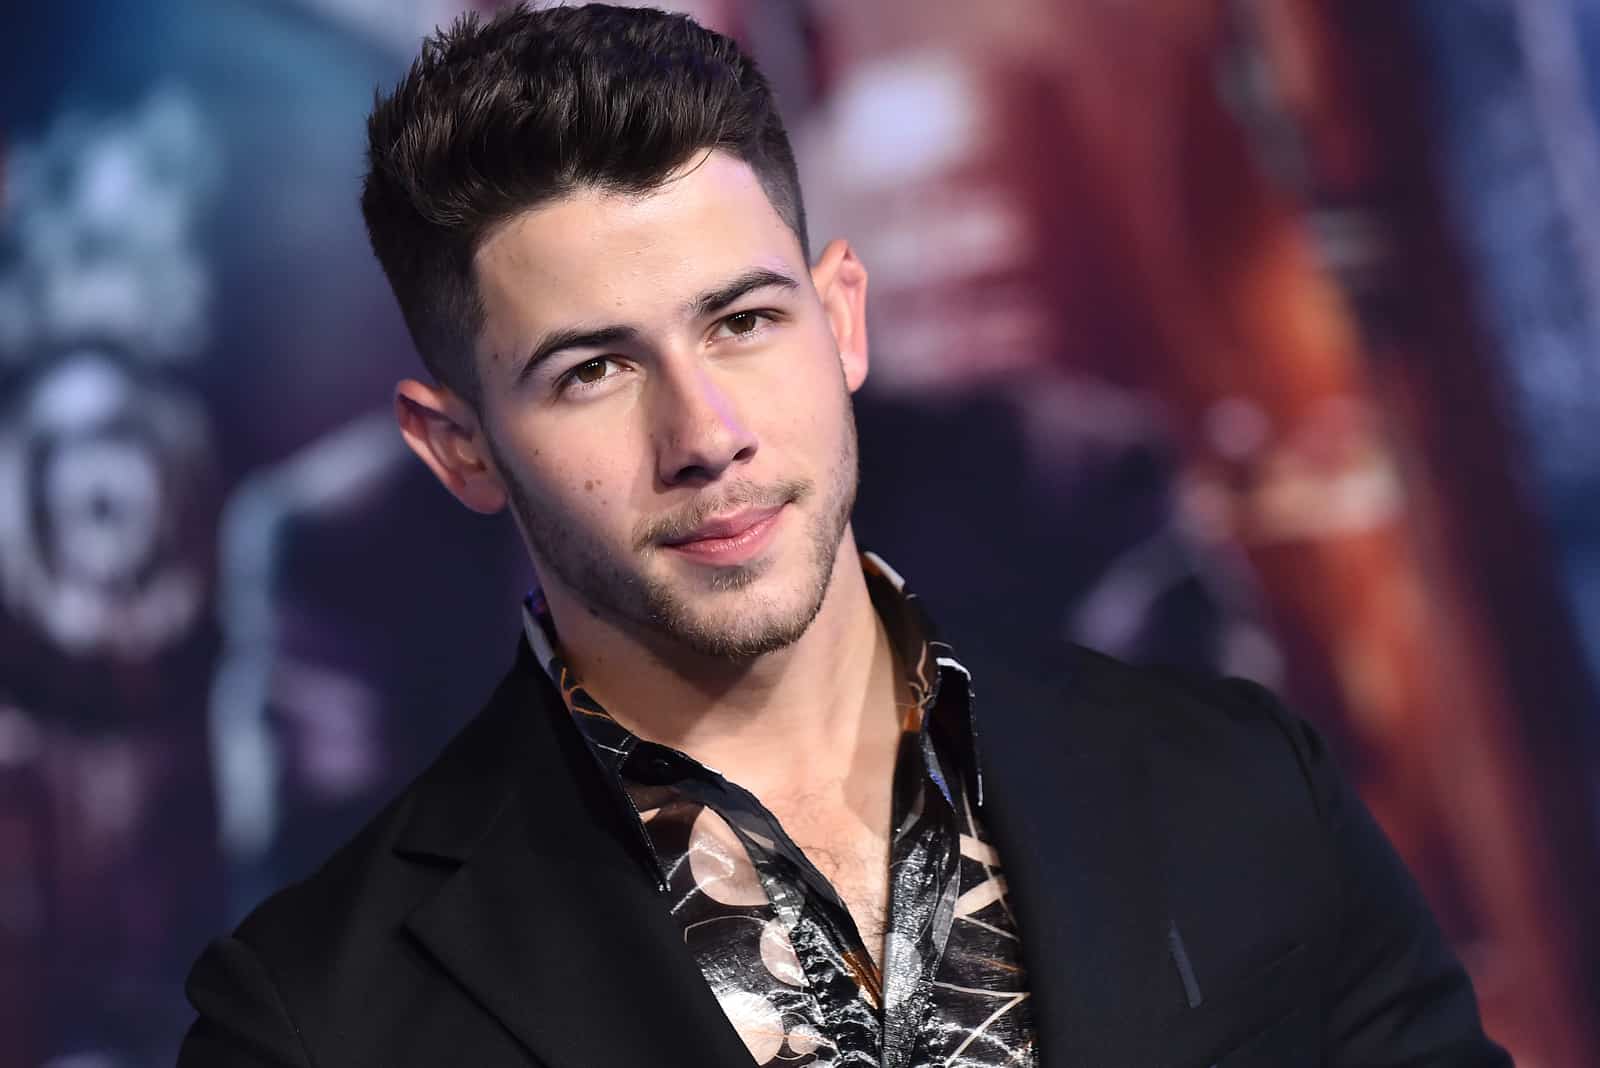 the beautiful Nick Jonas stands and looks in front of him